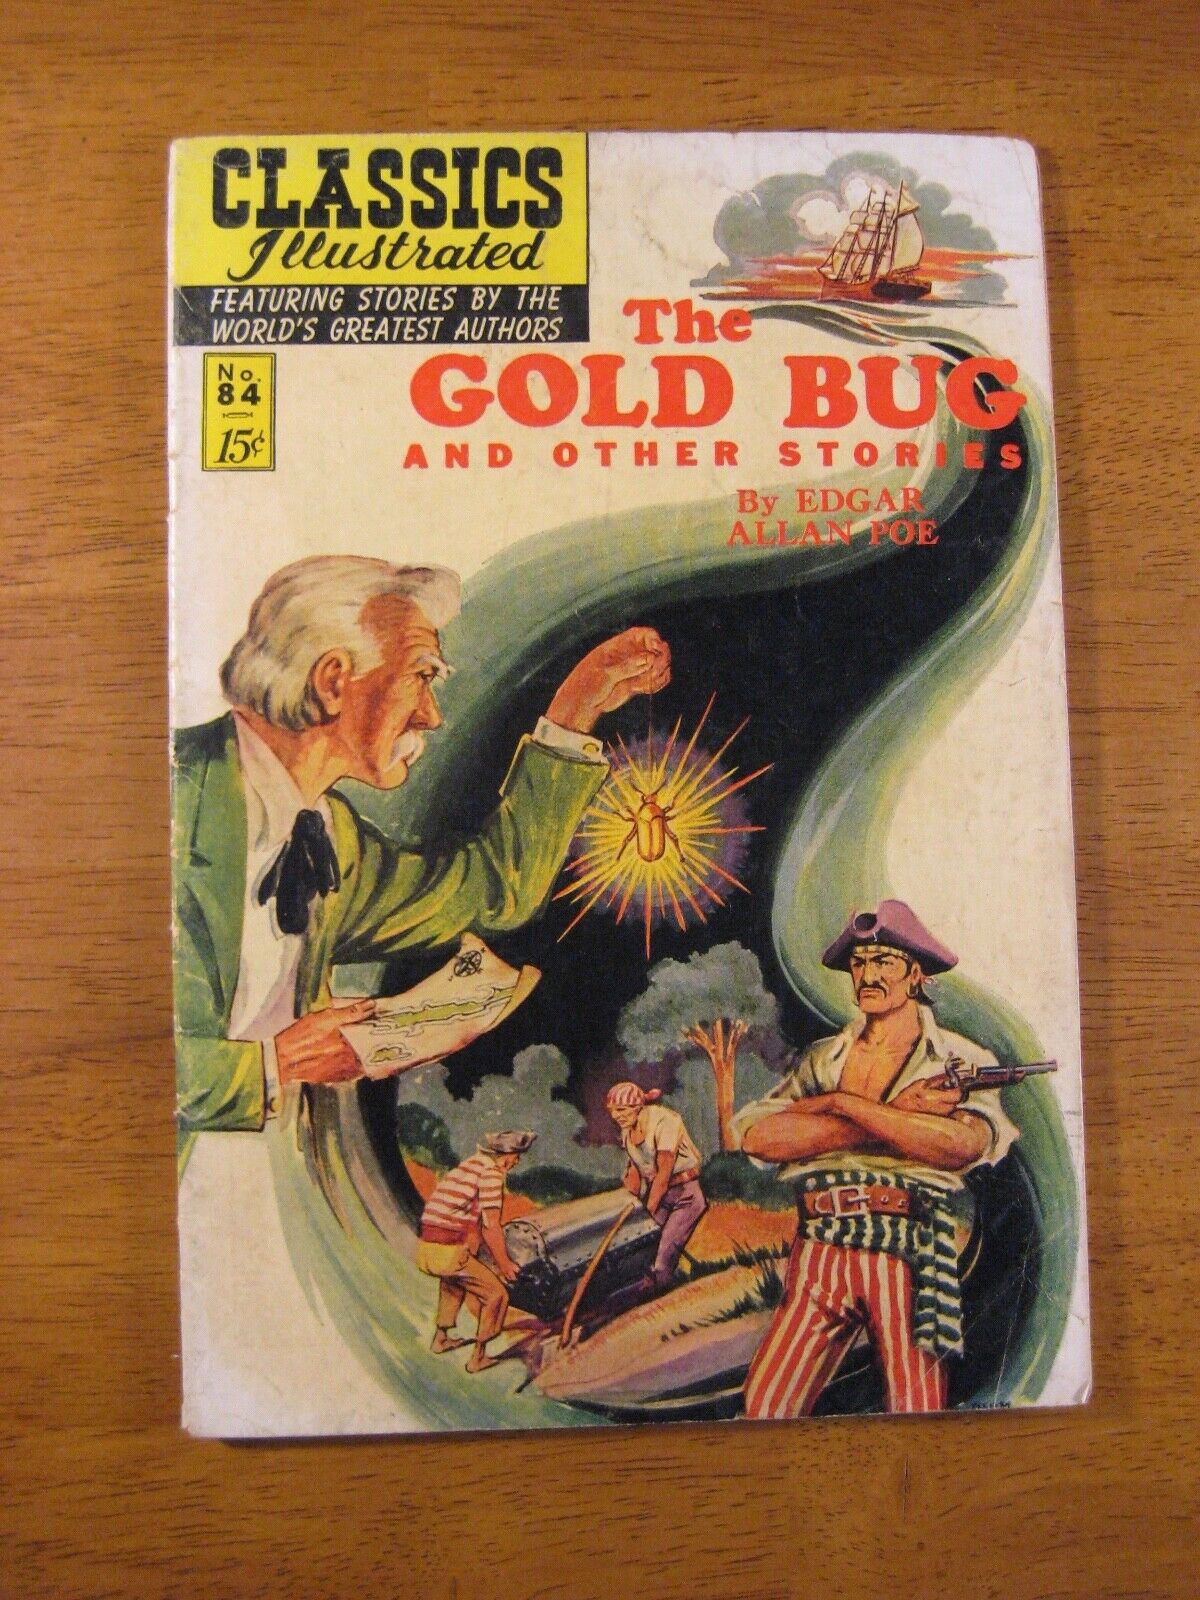 CLASSICS ILLUSTRATED #84, The Gold Bug (’51 Orig/1st Prt), HRN 85 (VG+ or VG/FN)